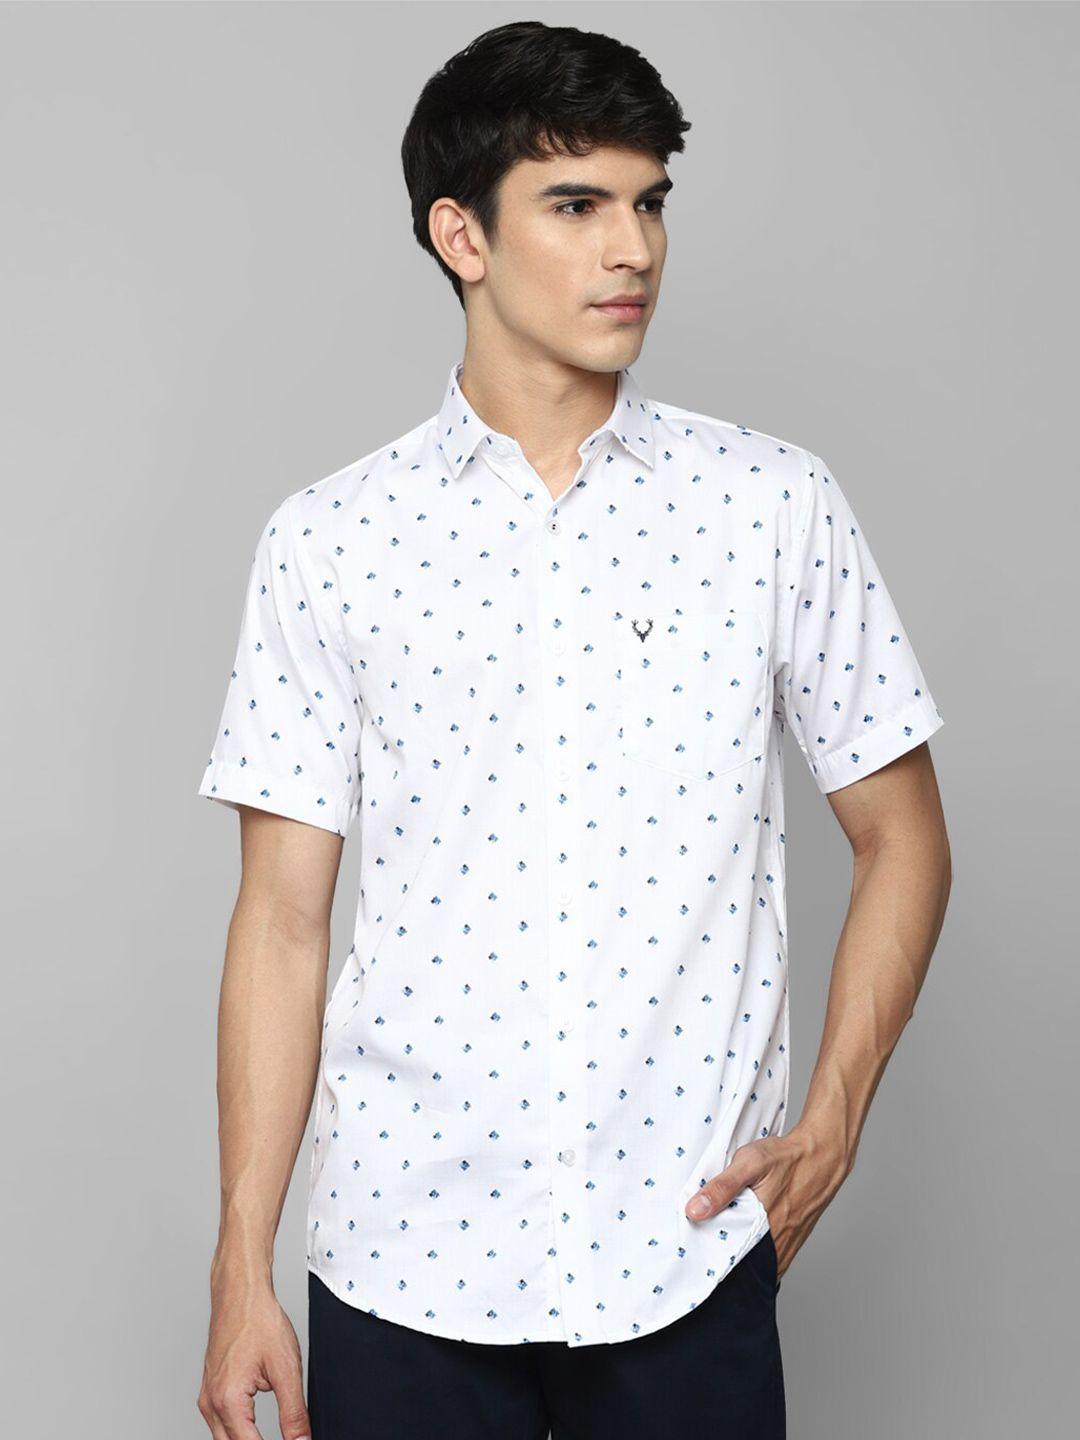 allen solly men white slim fit printed casual shirt